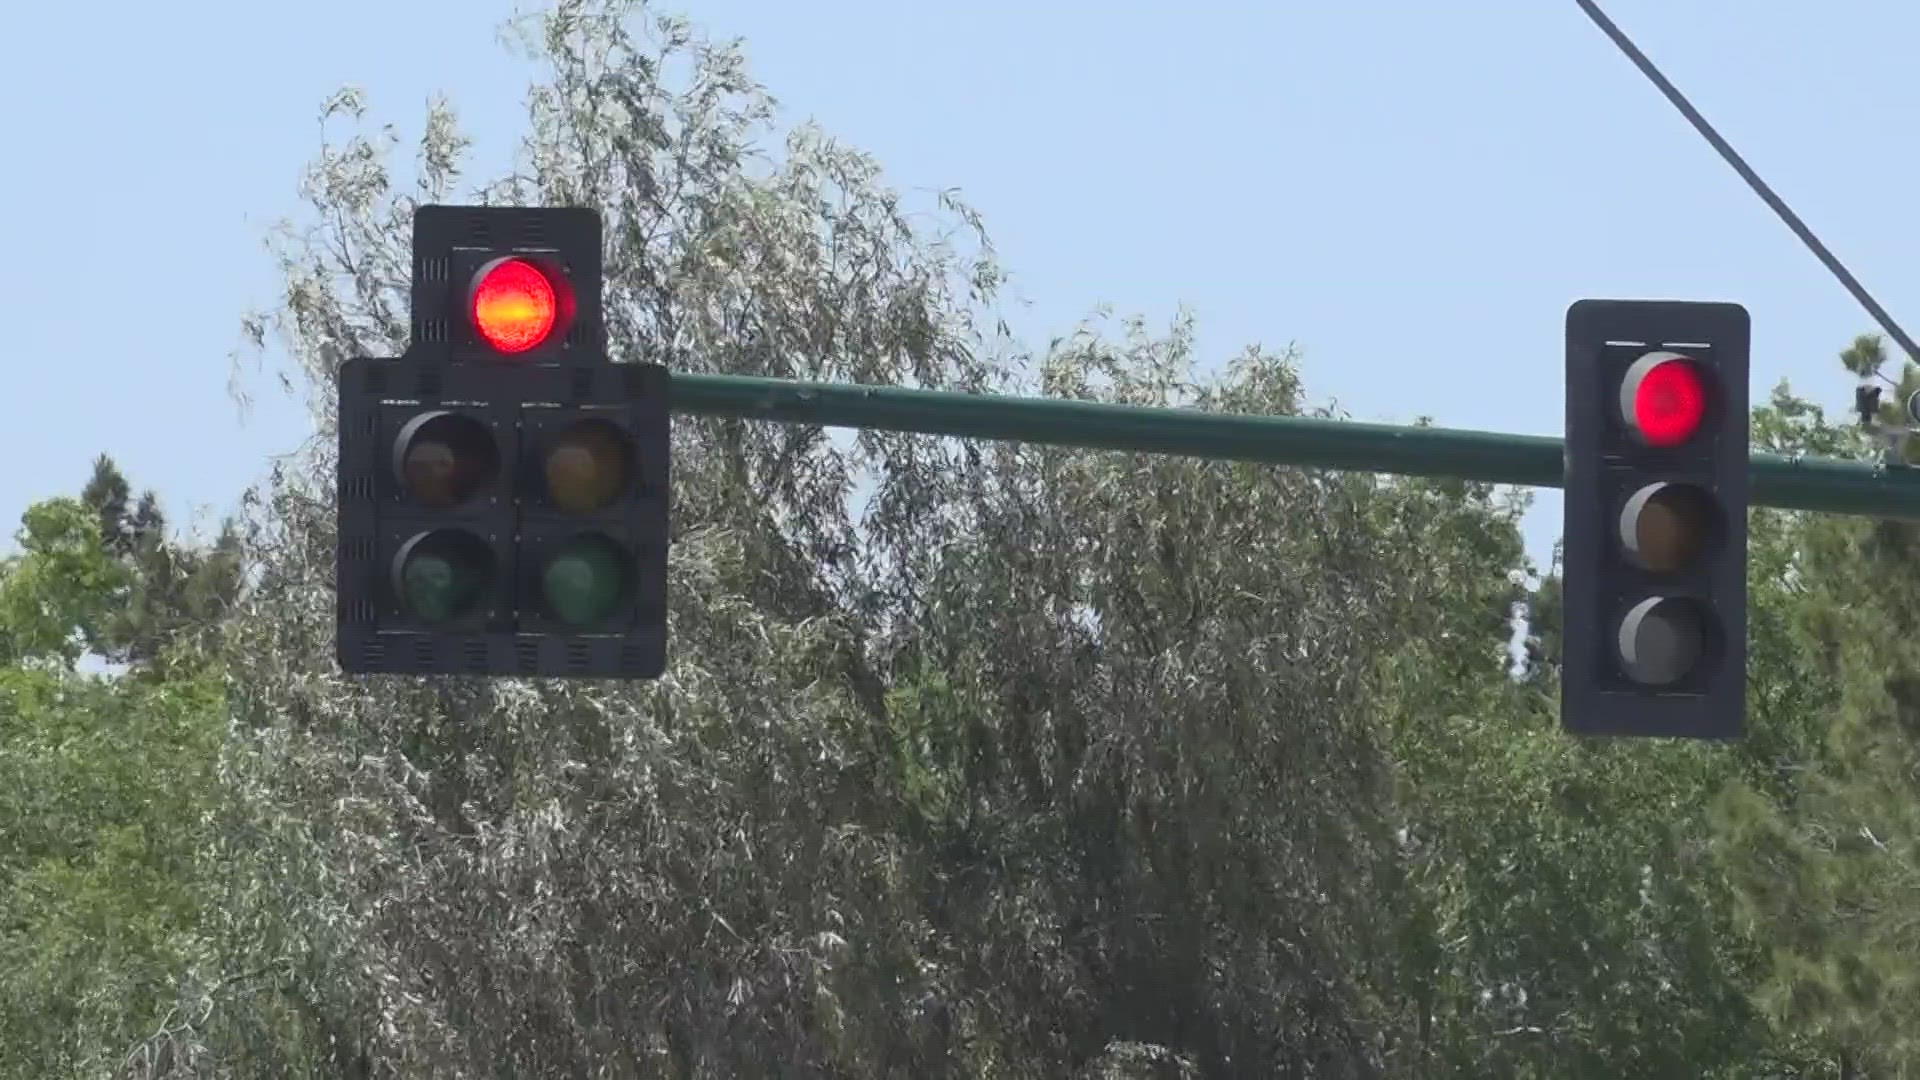 ADOT data shows that in 2020, nearly 5,000 crashes were caused by drivers who ran red lights.